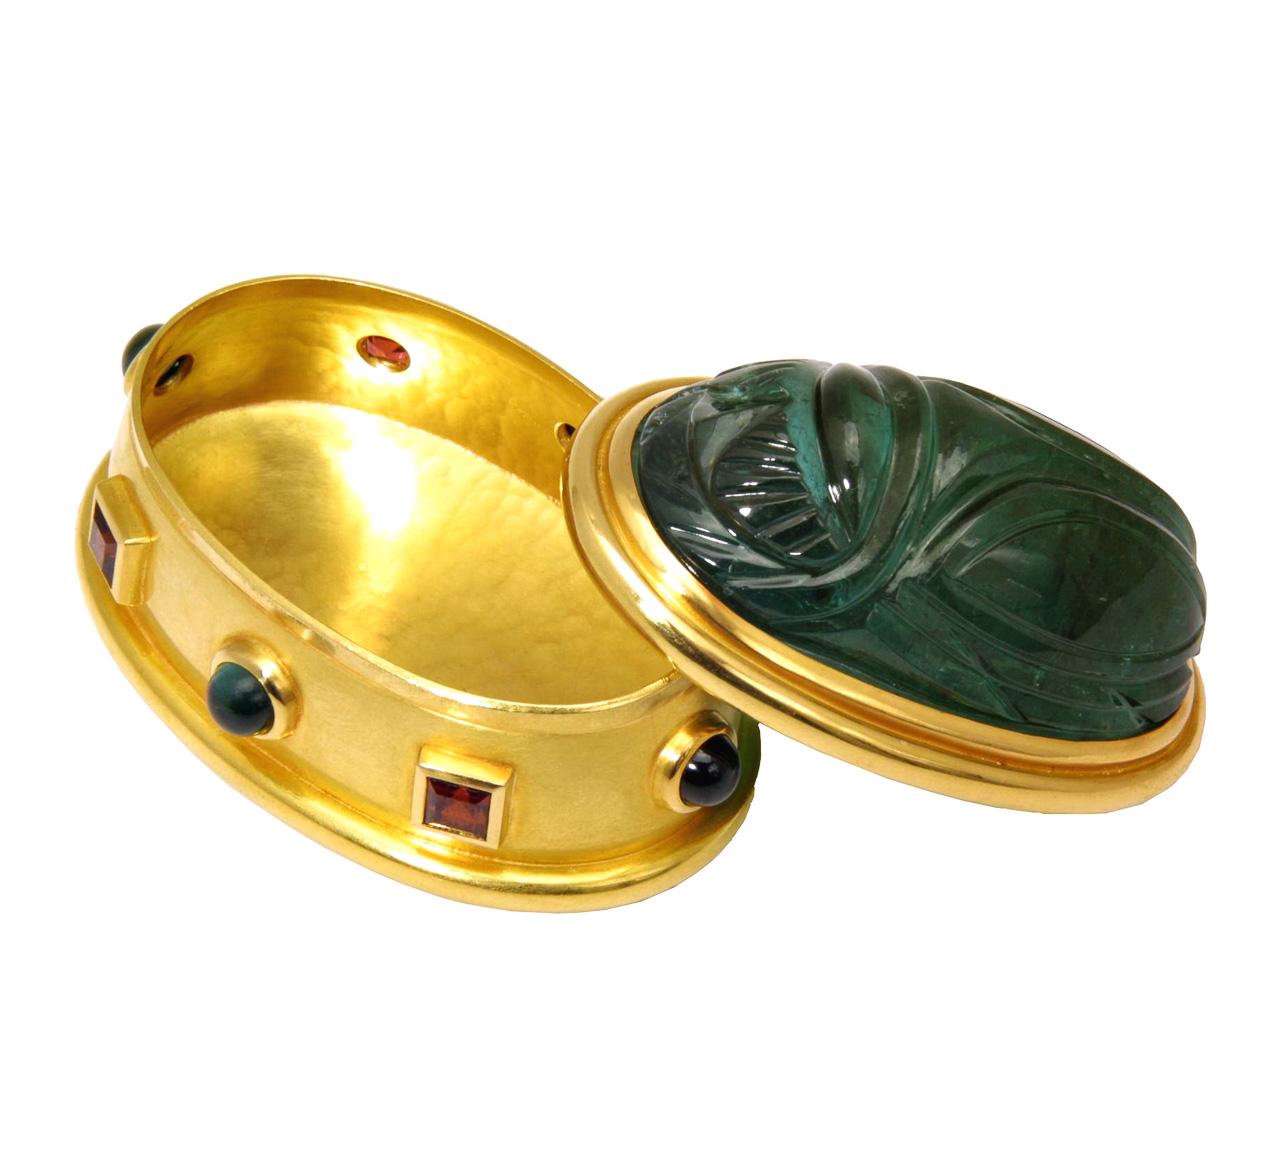 Box of Scarab with 22K yellow gold, 1 green tourmaline 212ct.,
4 red garnet 3,24ct. and 4 green tourmaline 3,76ct.